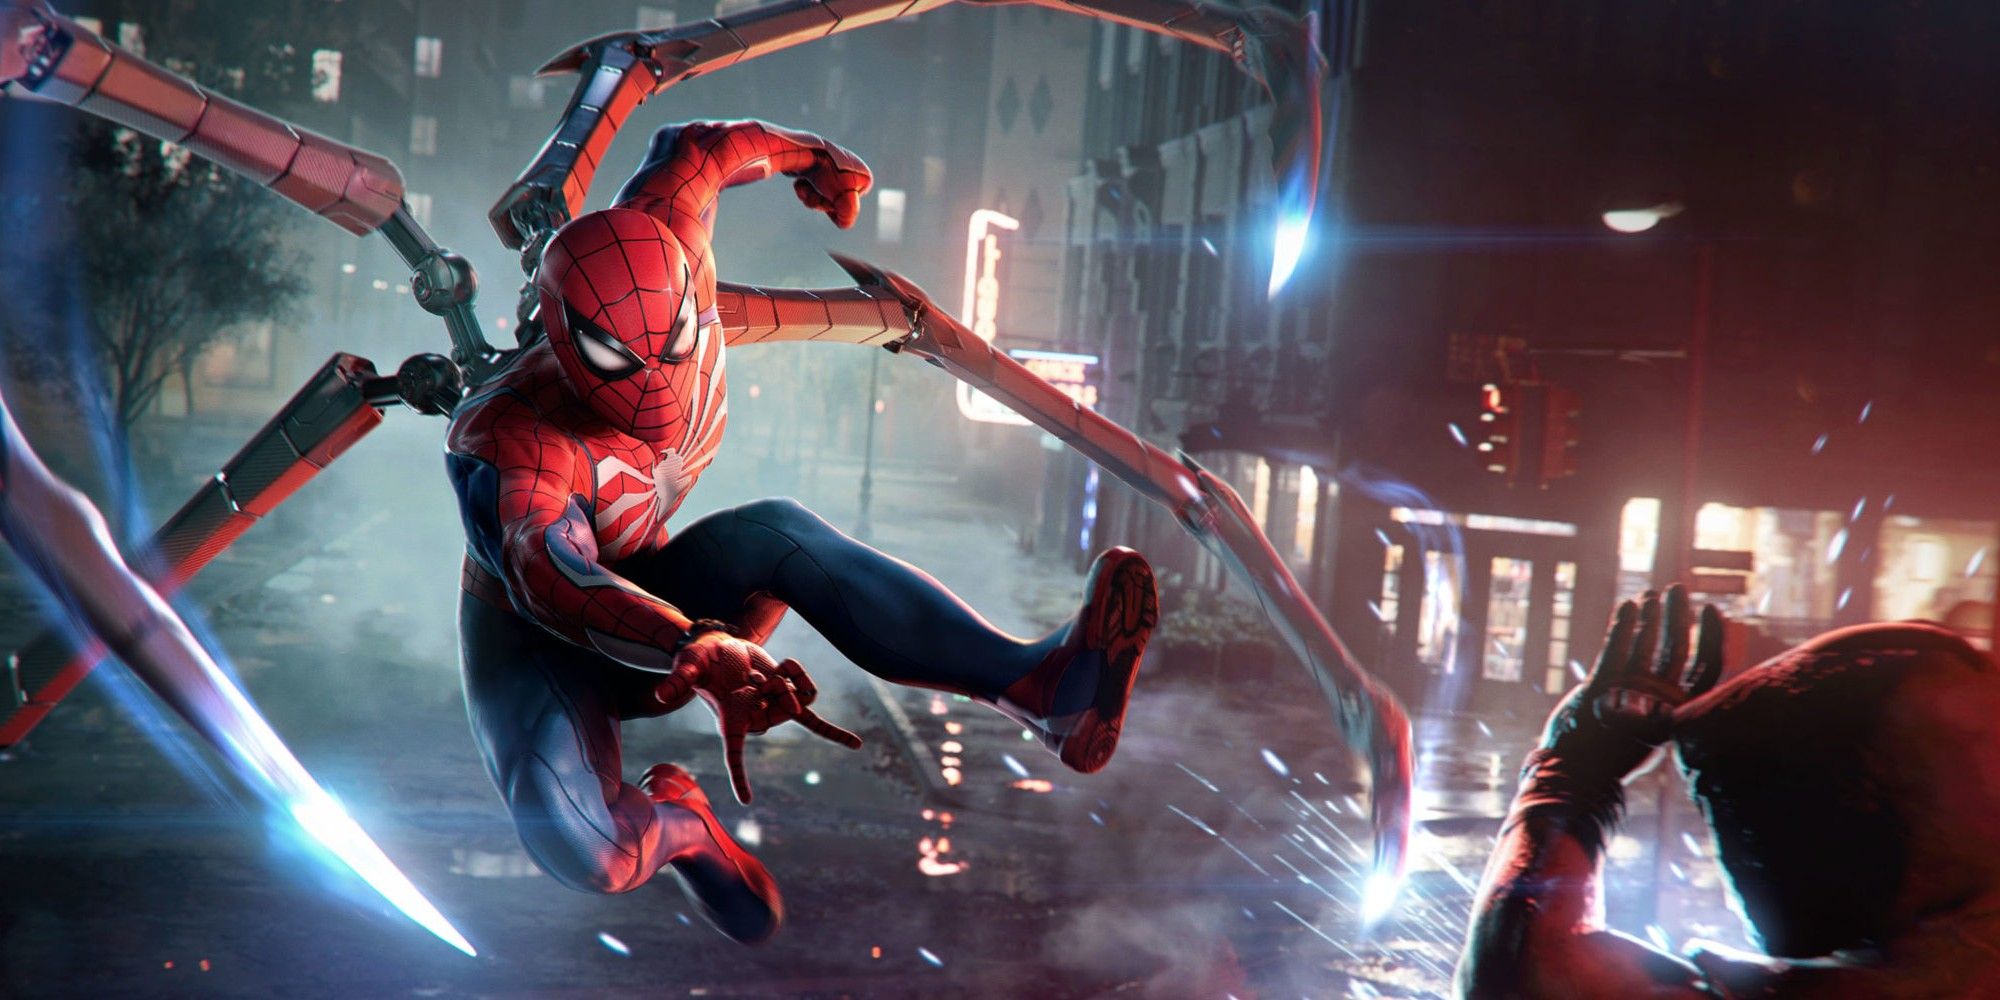 Spider-Man in action in a game